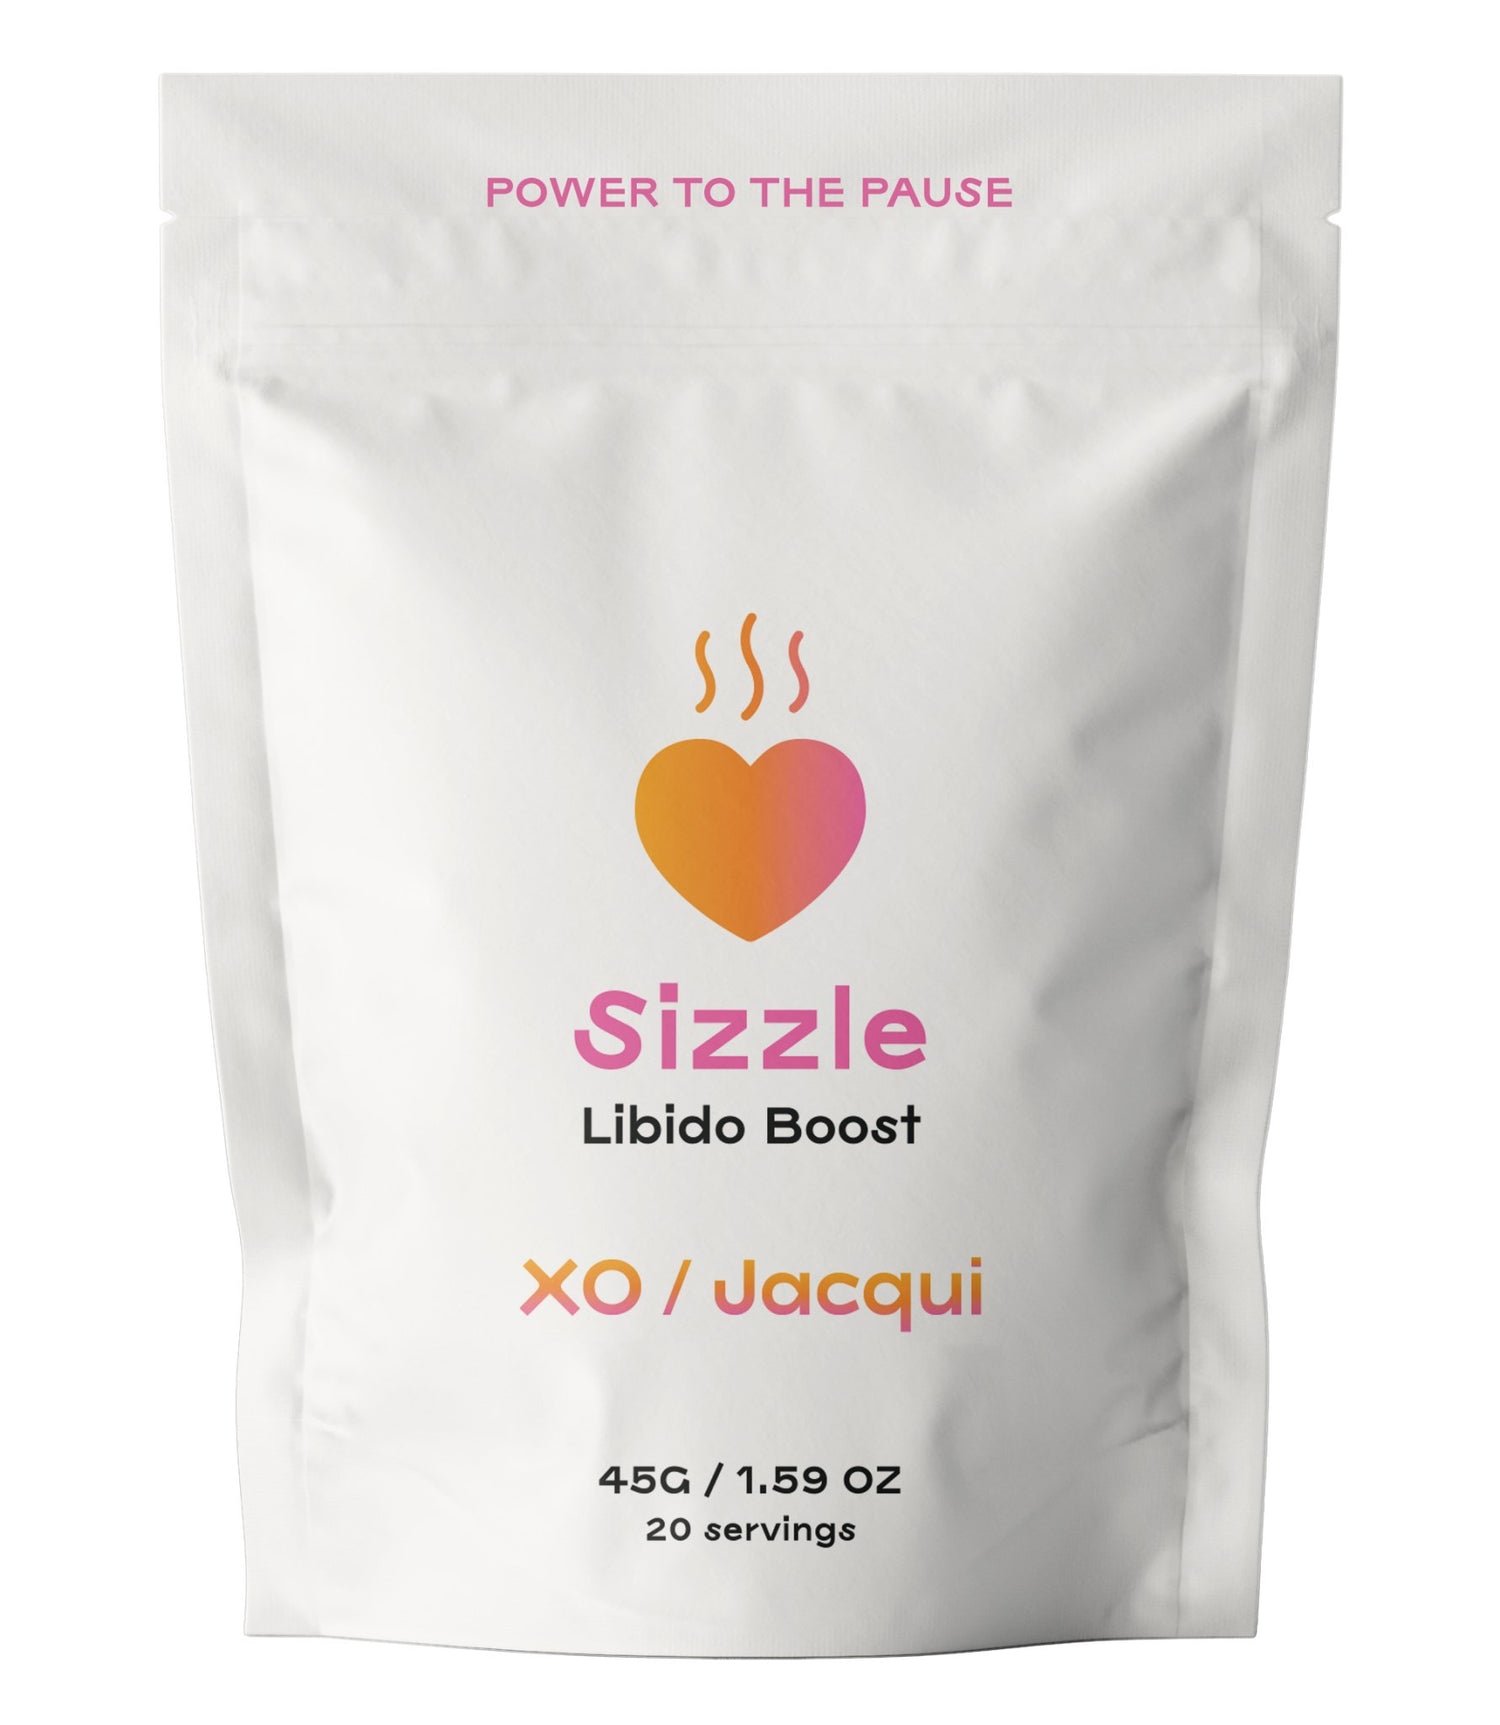 Power to the Pause | Sizzle Libido Boost | Sizzle Boost - XO Jacqui